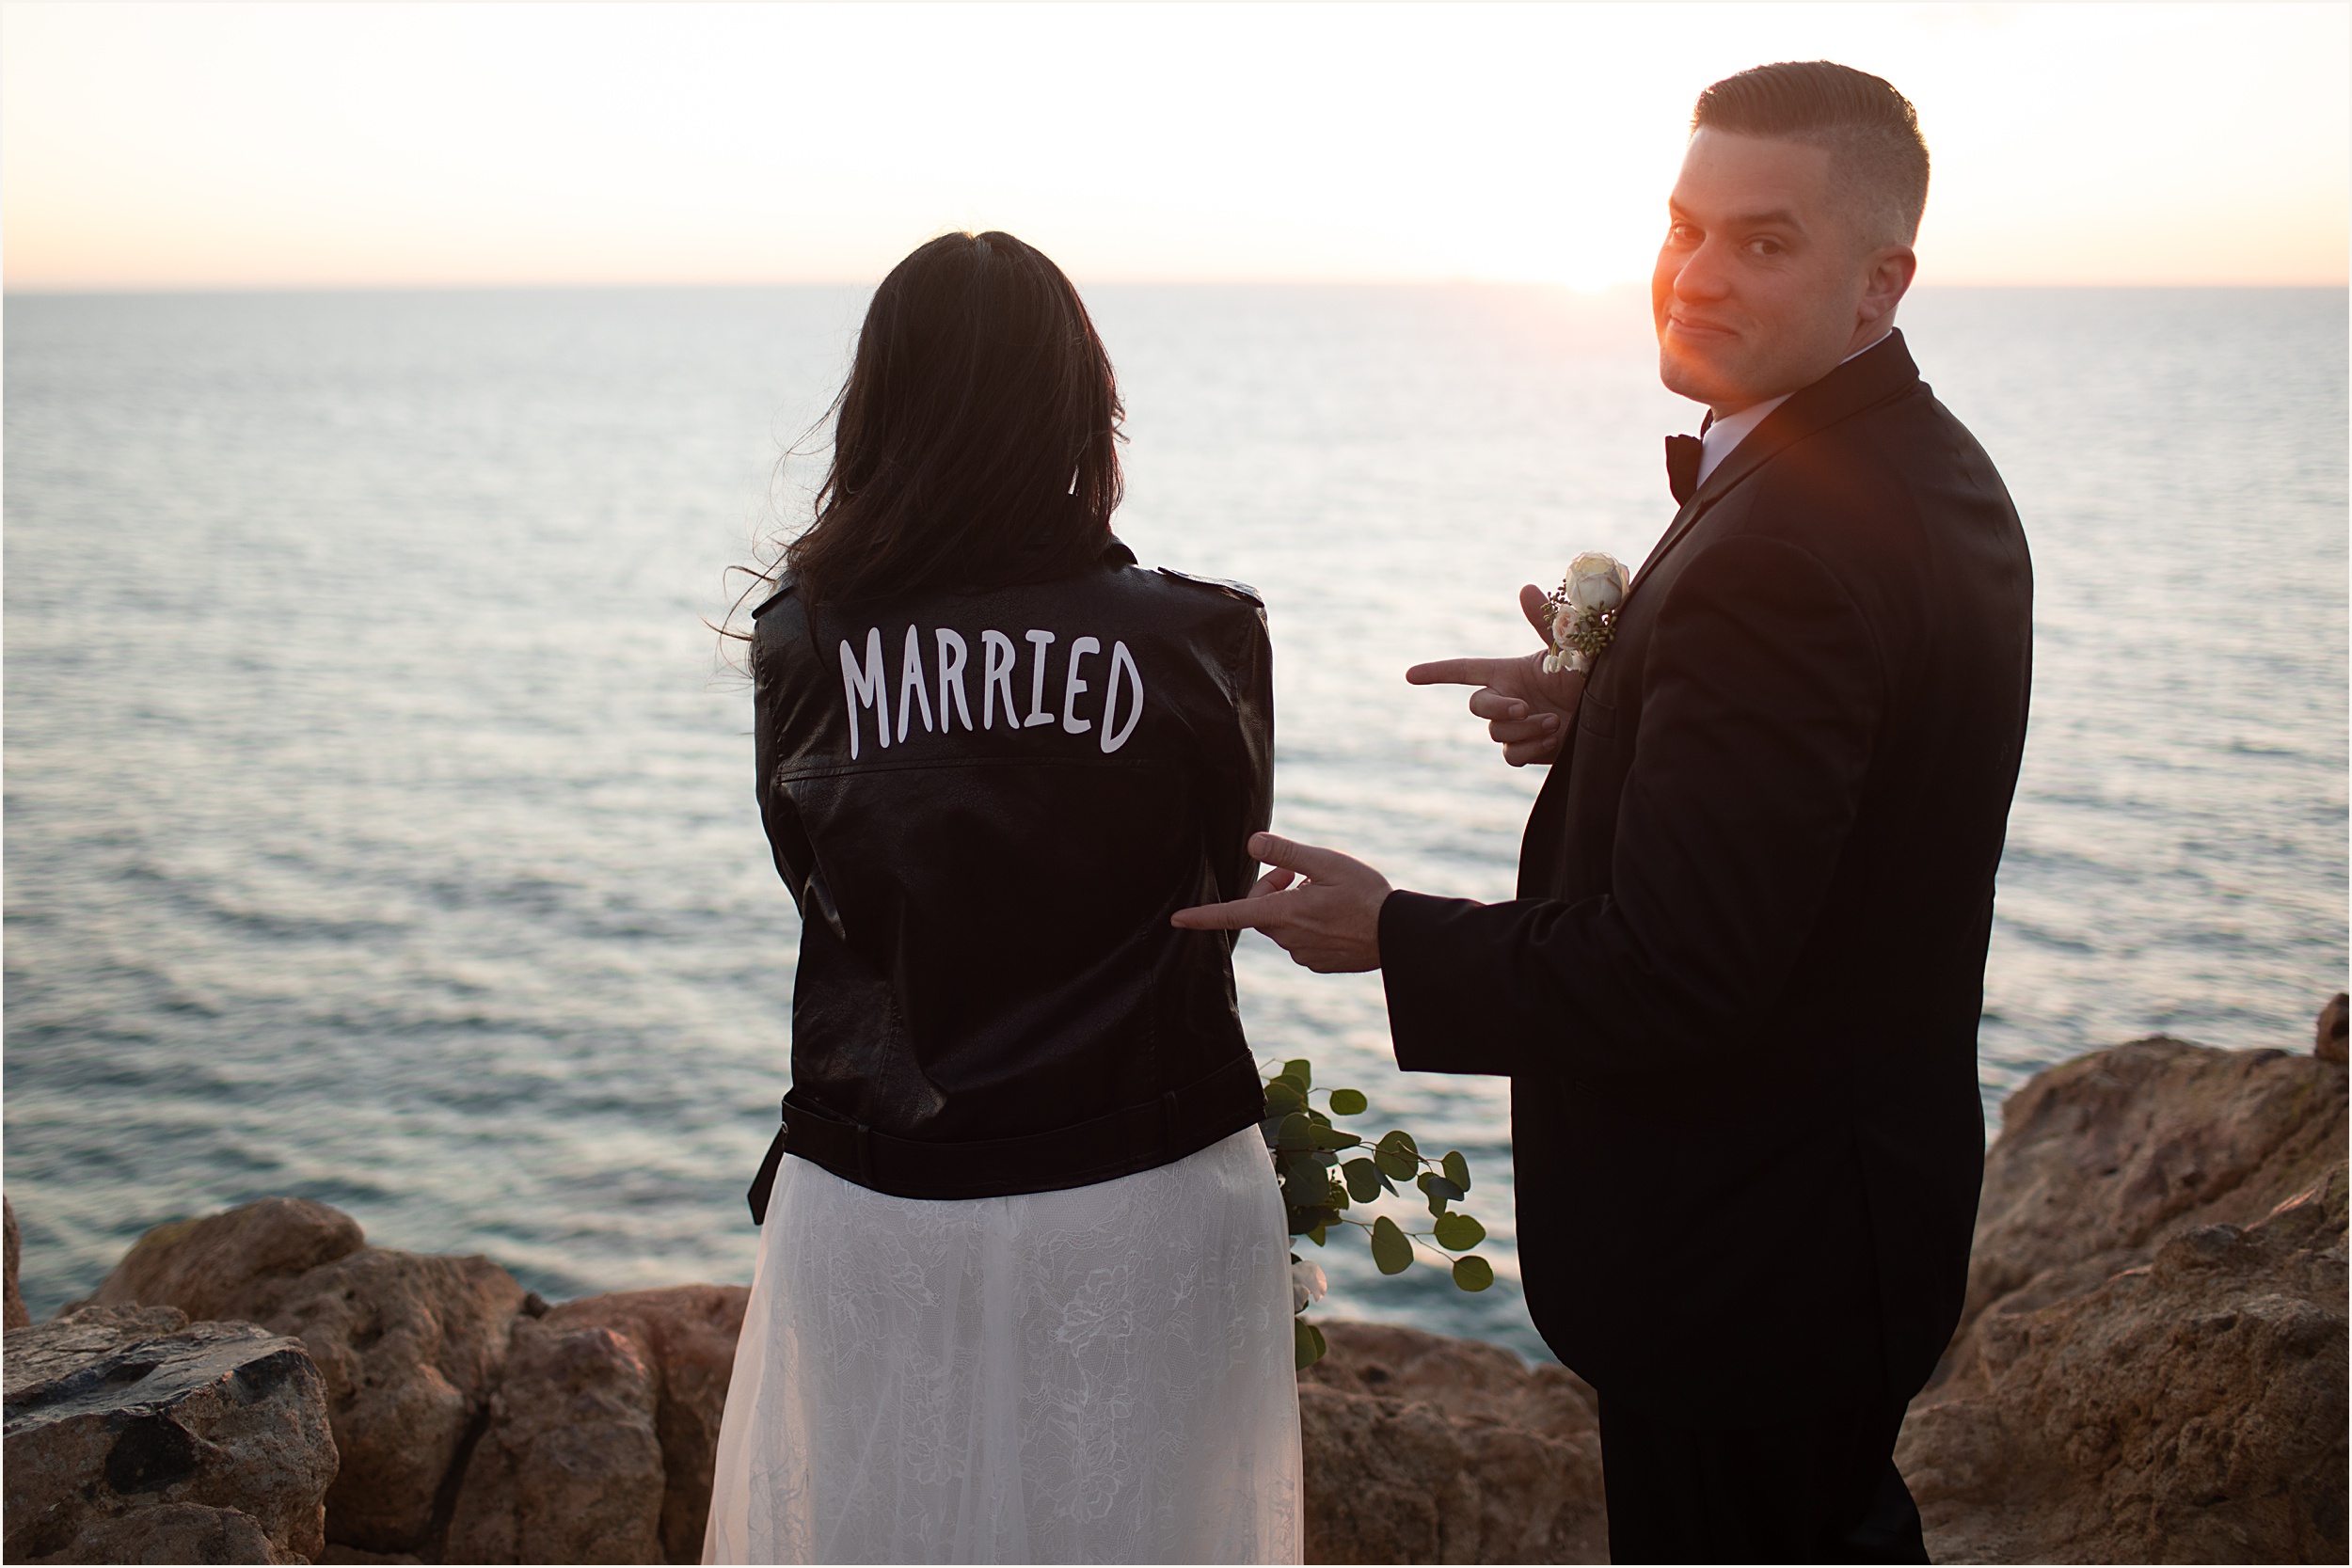 Photo of groom pointing at brides wedding leather jacket that reads Married on the back during their Malibu beach elopement